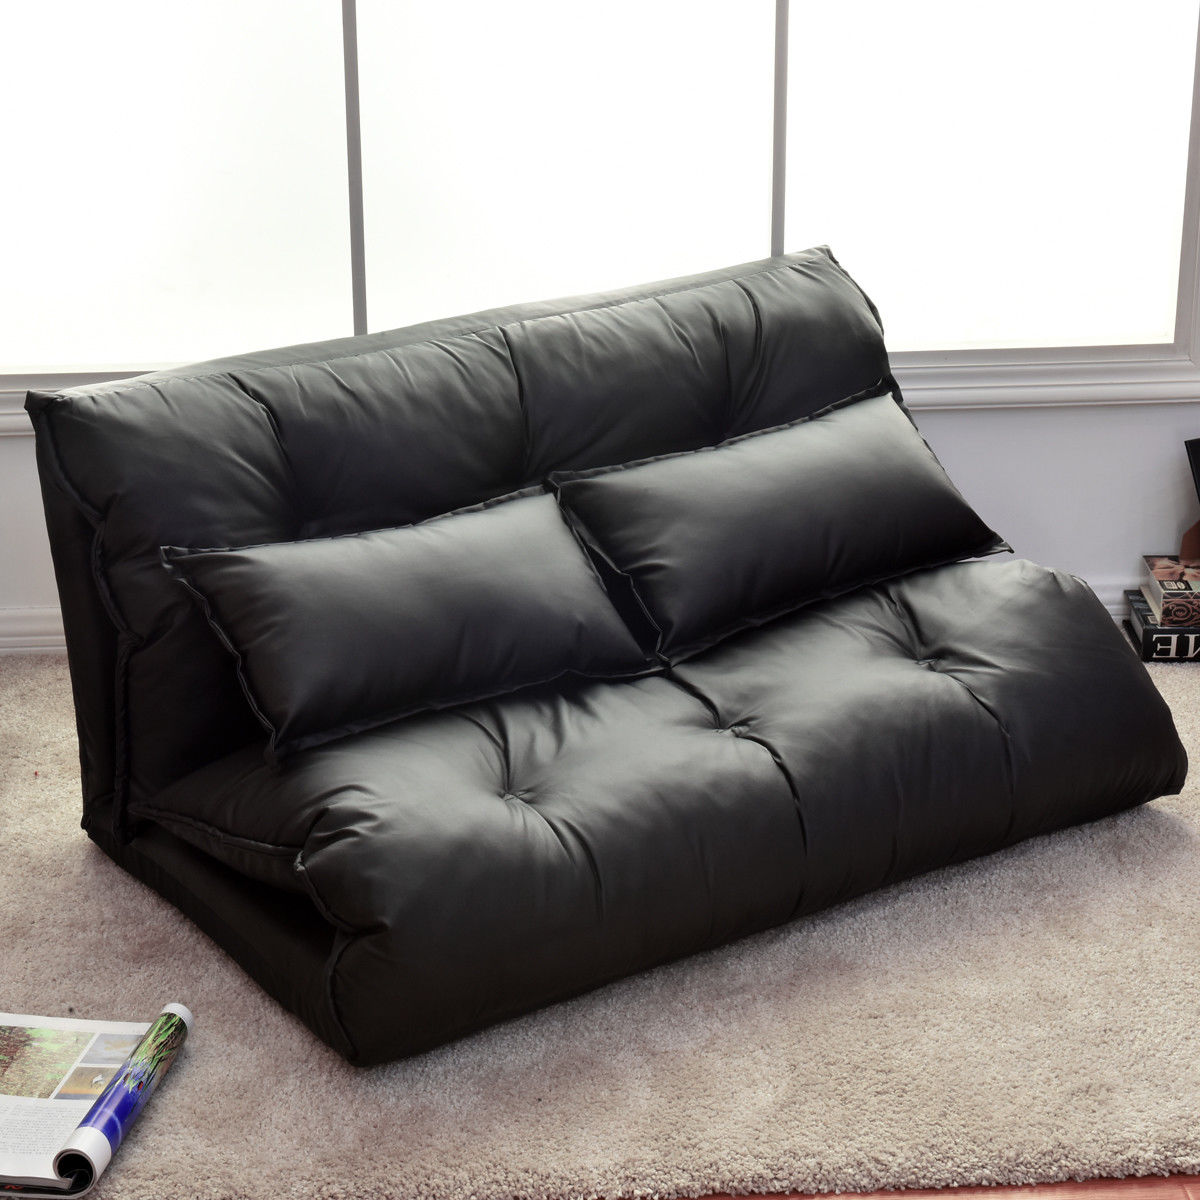 Costway PU Leather Foldable Modern Leisure Floor Sofa Bed Video Gaming 2 Pillows Black - image 2 of 7